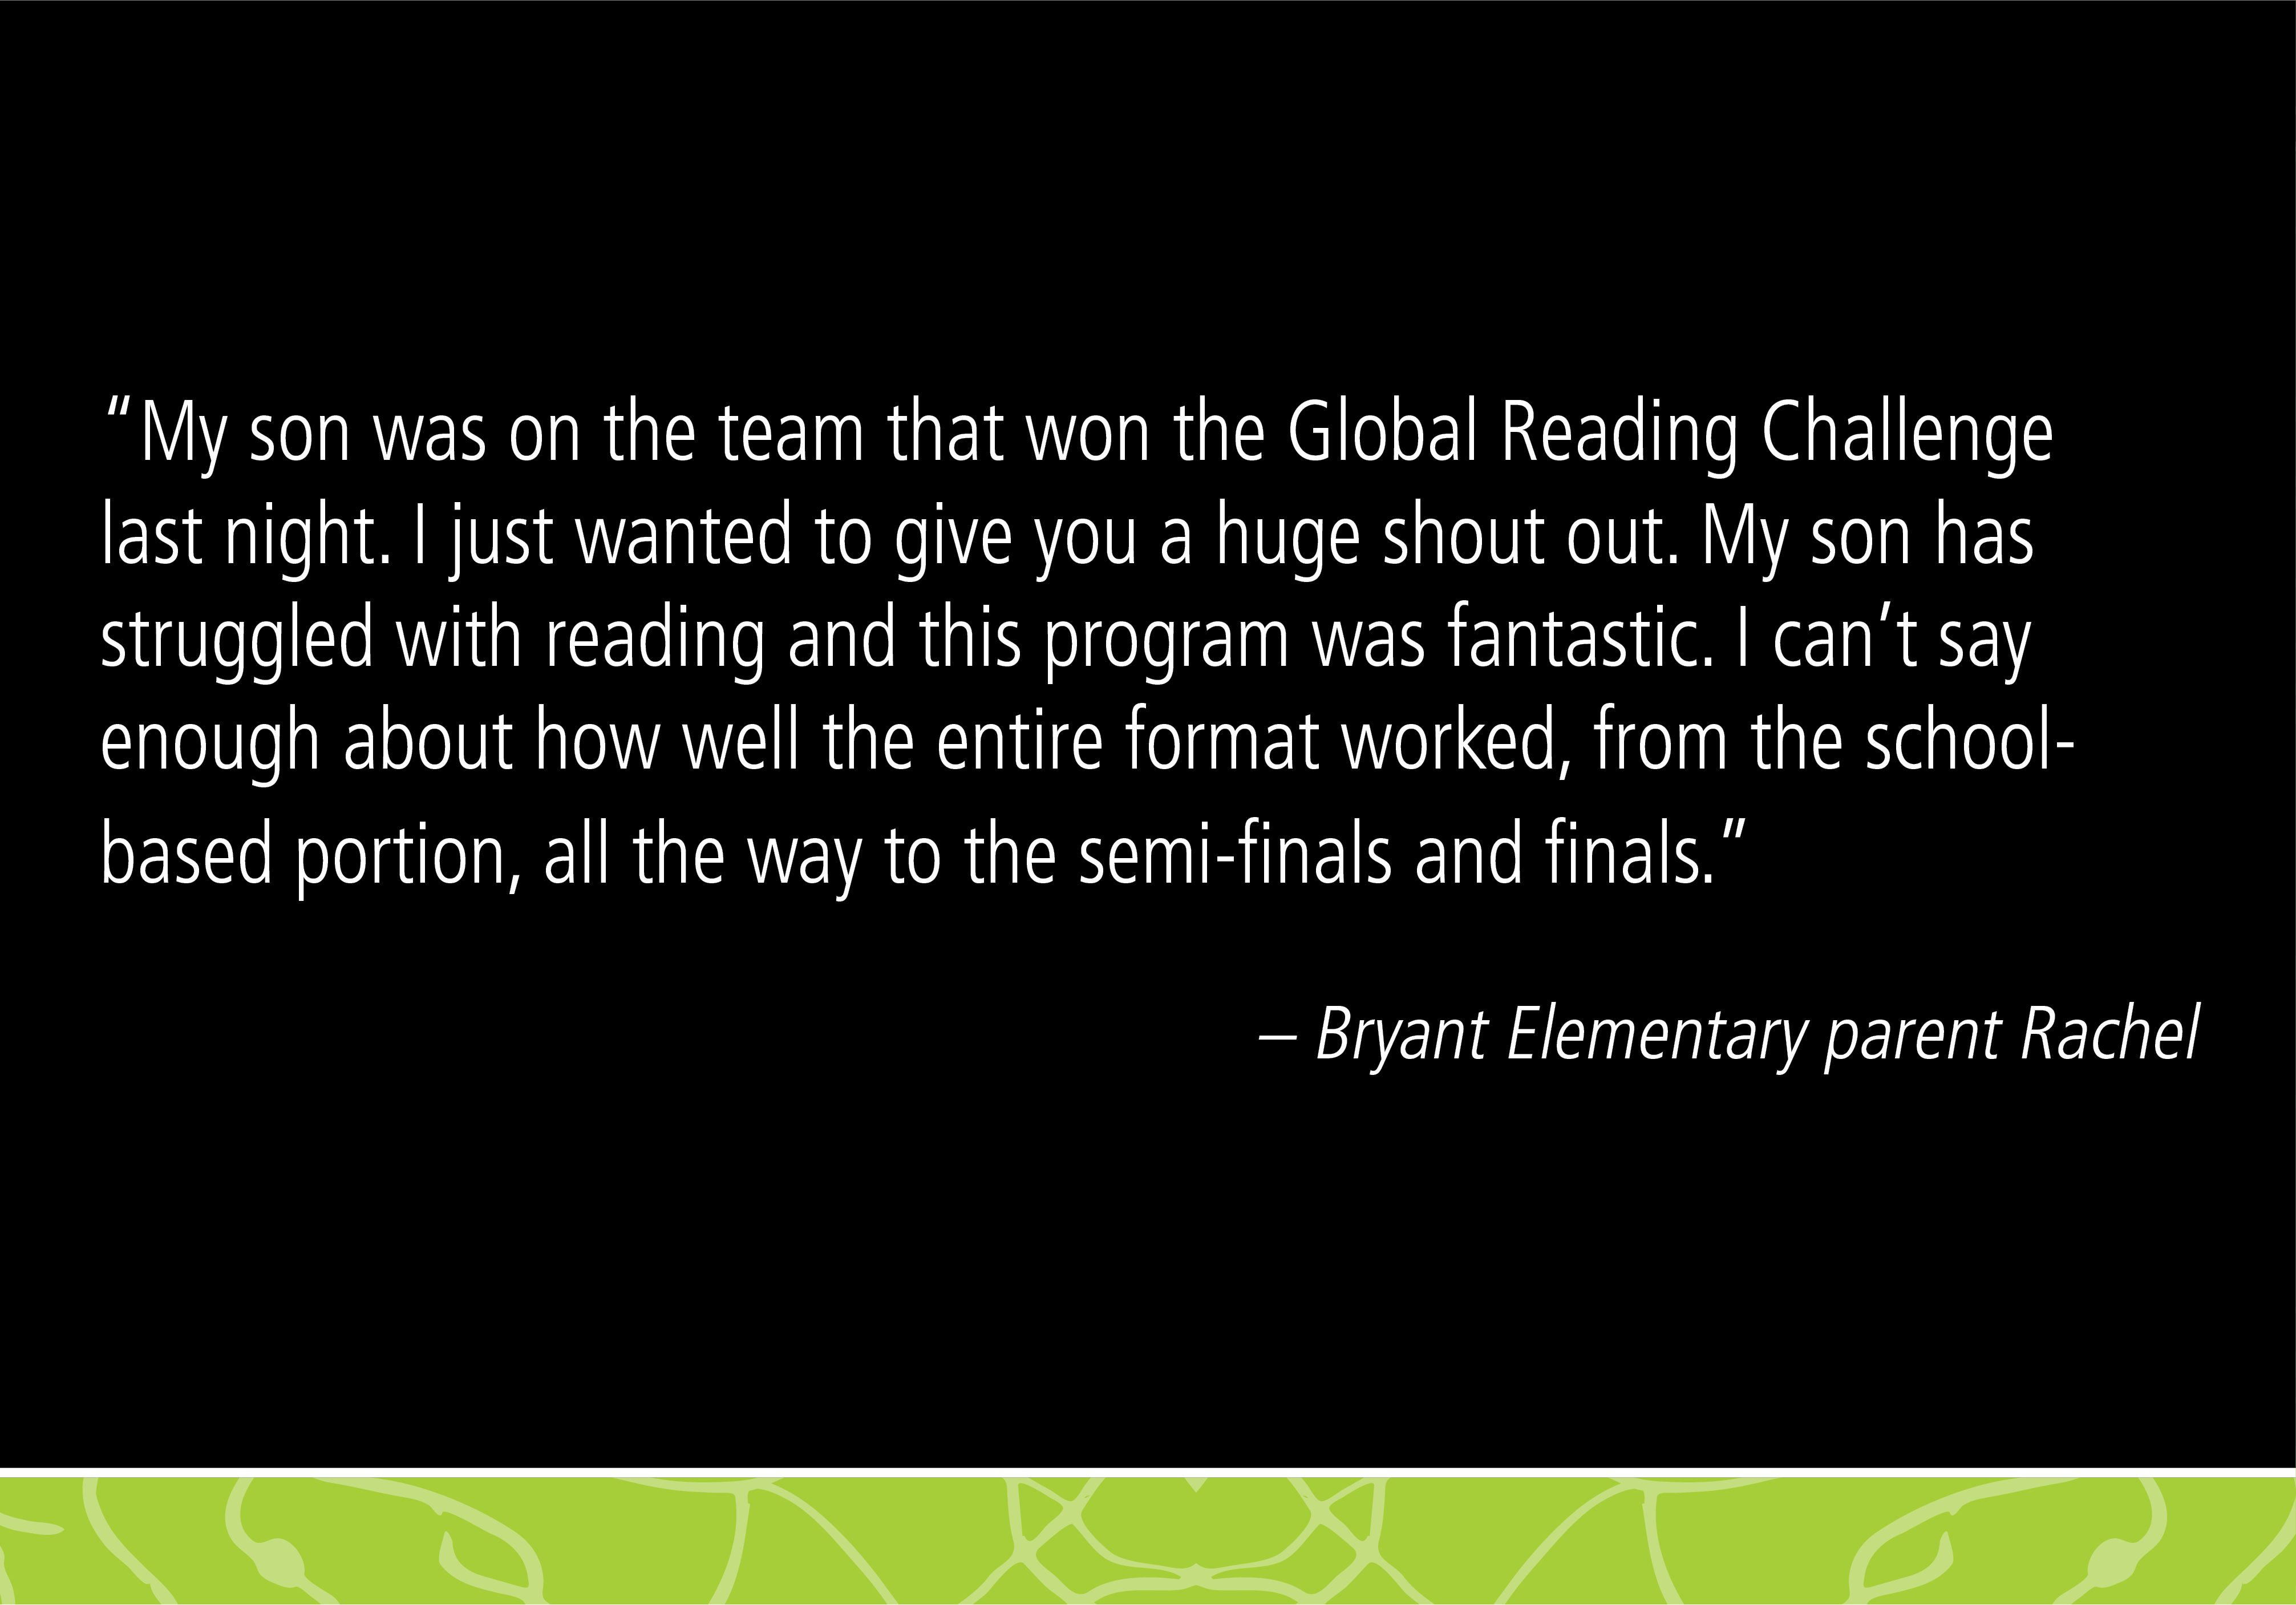 “My son was on the team that won the Global Reading Challenge last night. I just wanted to give you a huge shout out. My son has struggled with reading and this program was fantastic. I can’t say enough about how well the entire format worked, from the school-based portion, all the way to the semi-finals and finals. - Bryant Elementary parent Rachel 